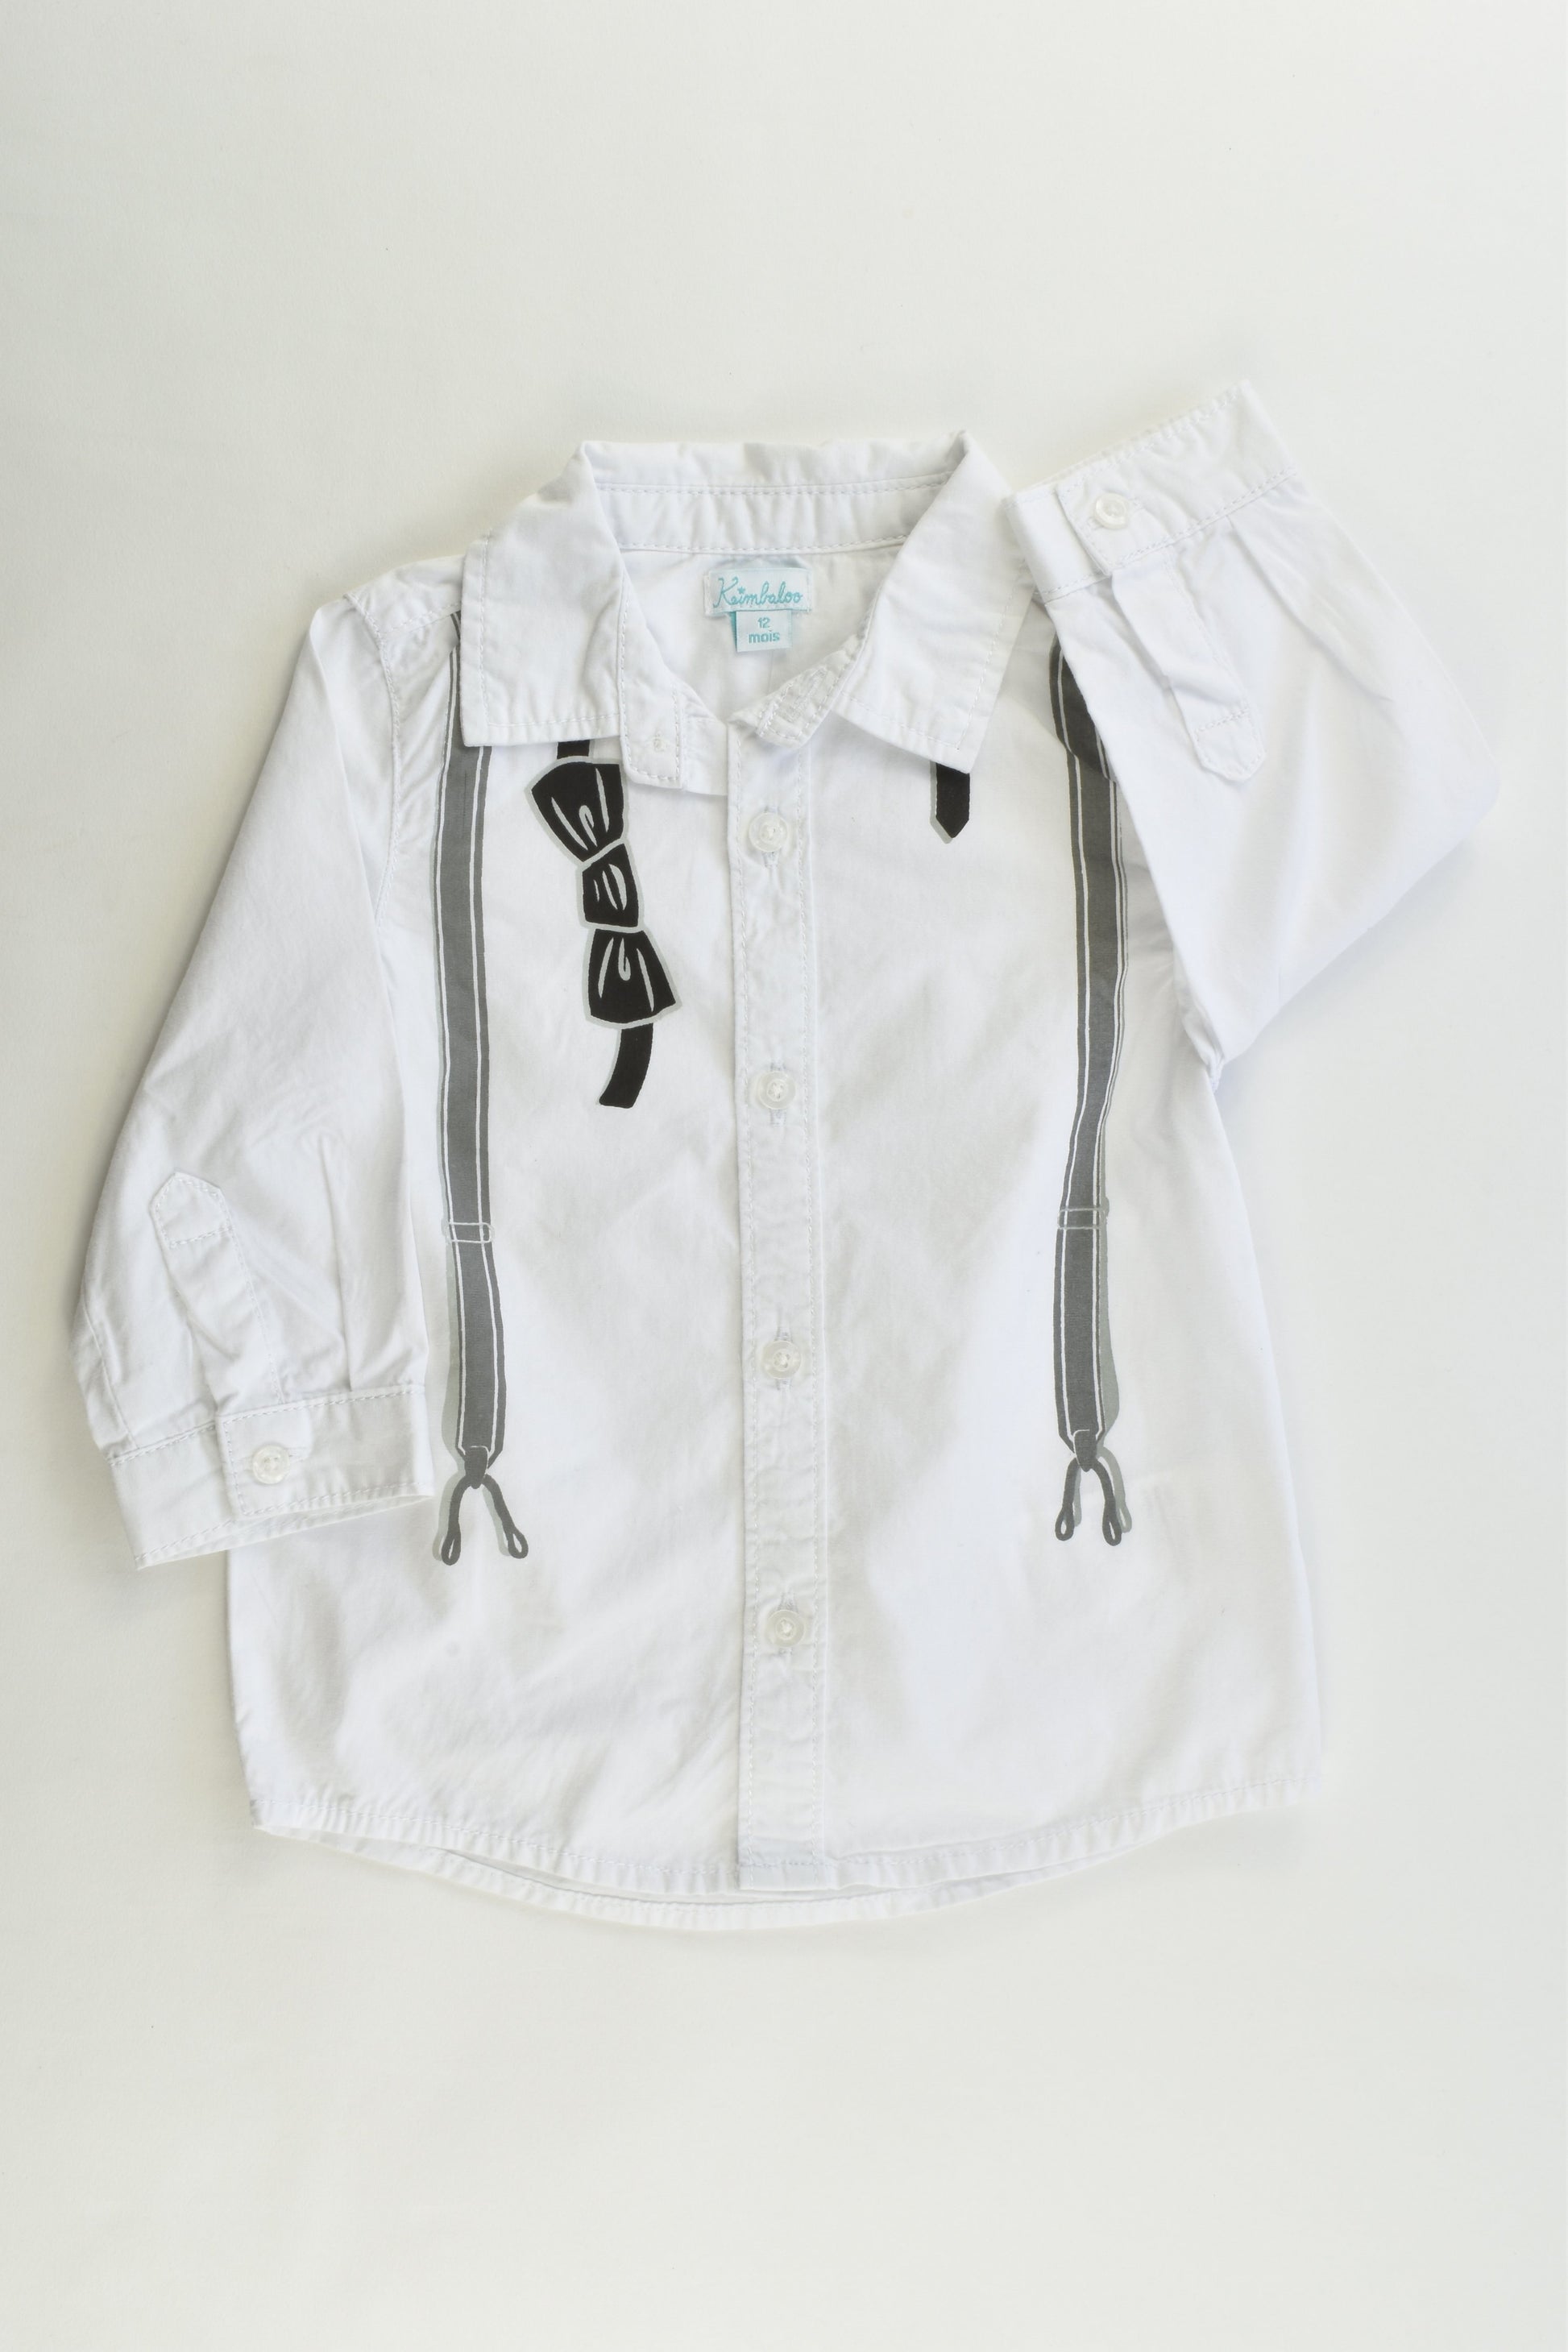 Kimbaloo (France) Size 1 (12 months) Suspenders and Bow Collared Shirt